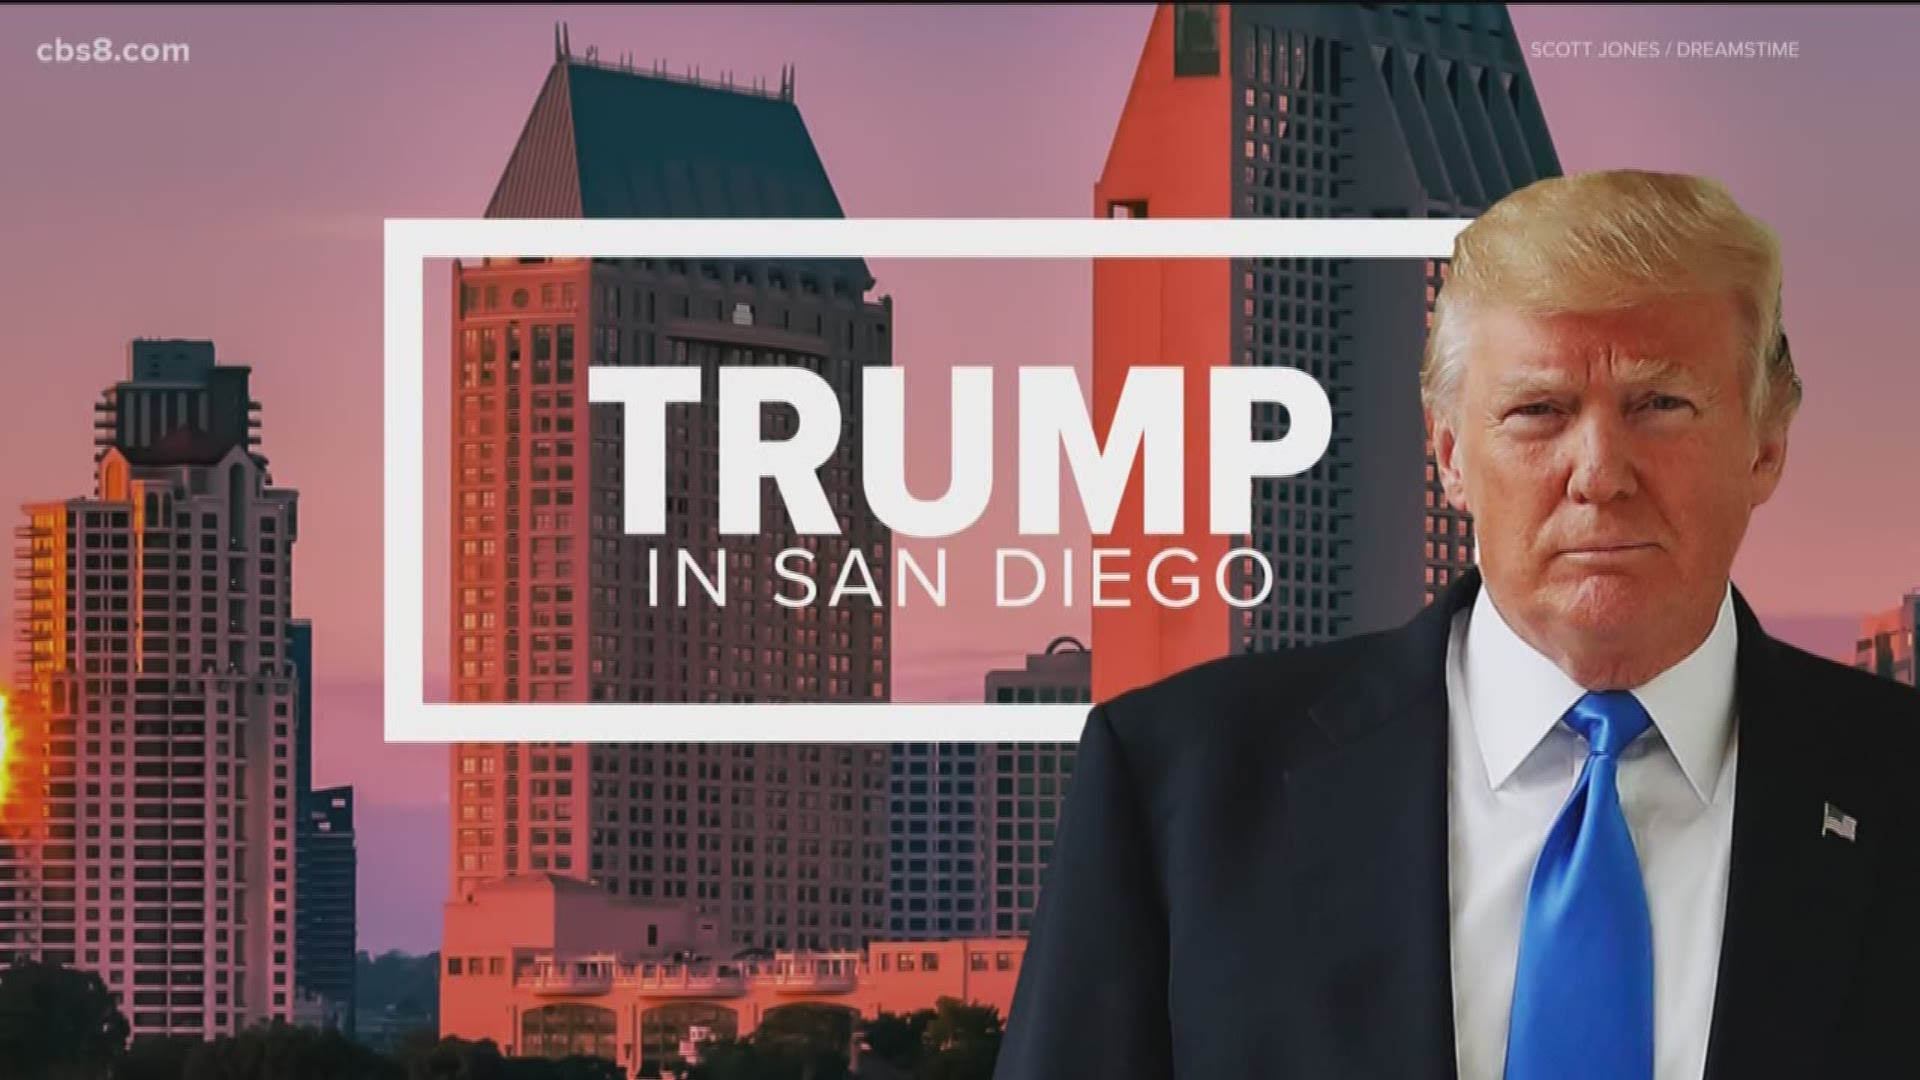 Traffic, a luxury hotel, eager supporters, outspoken critics and even an inflatable baby. We have everything you need to know about President Trump's planned visit to San Diego.